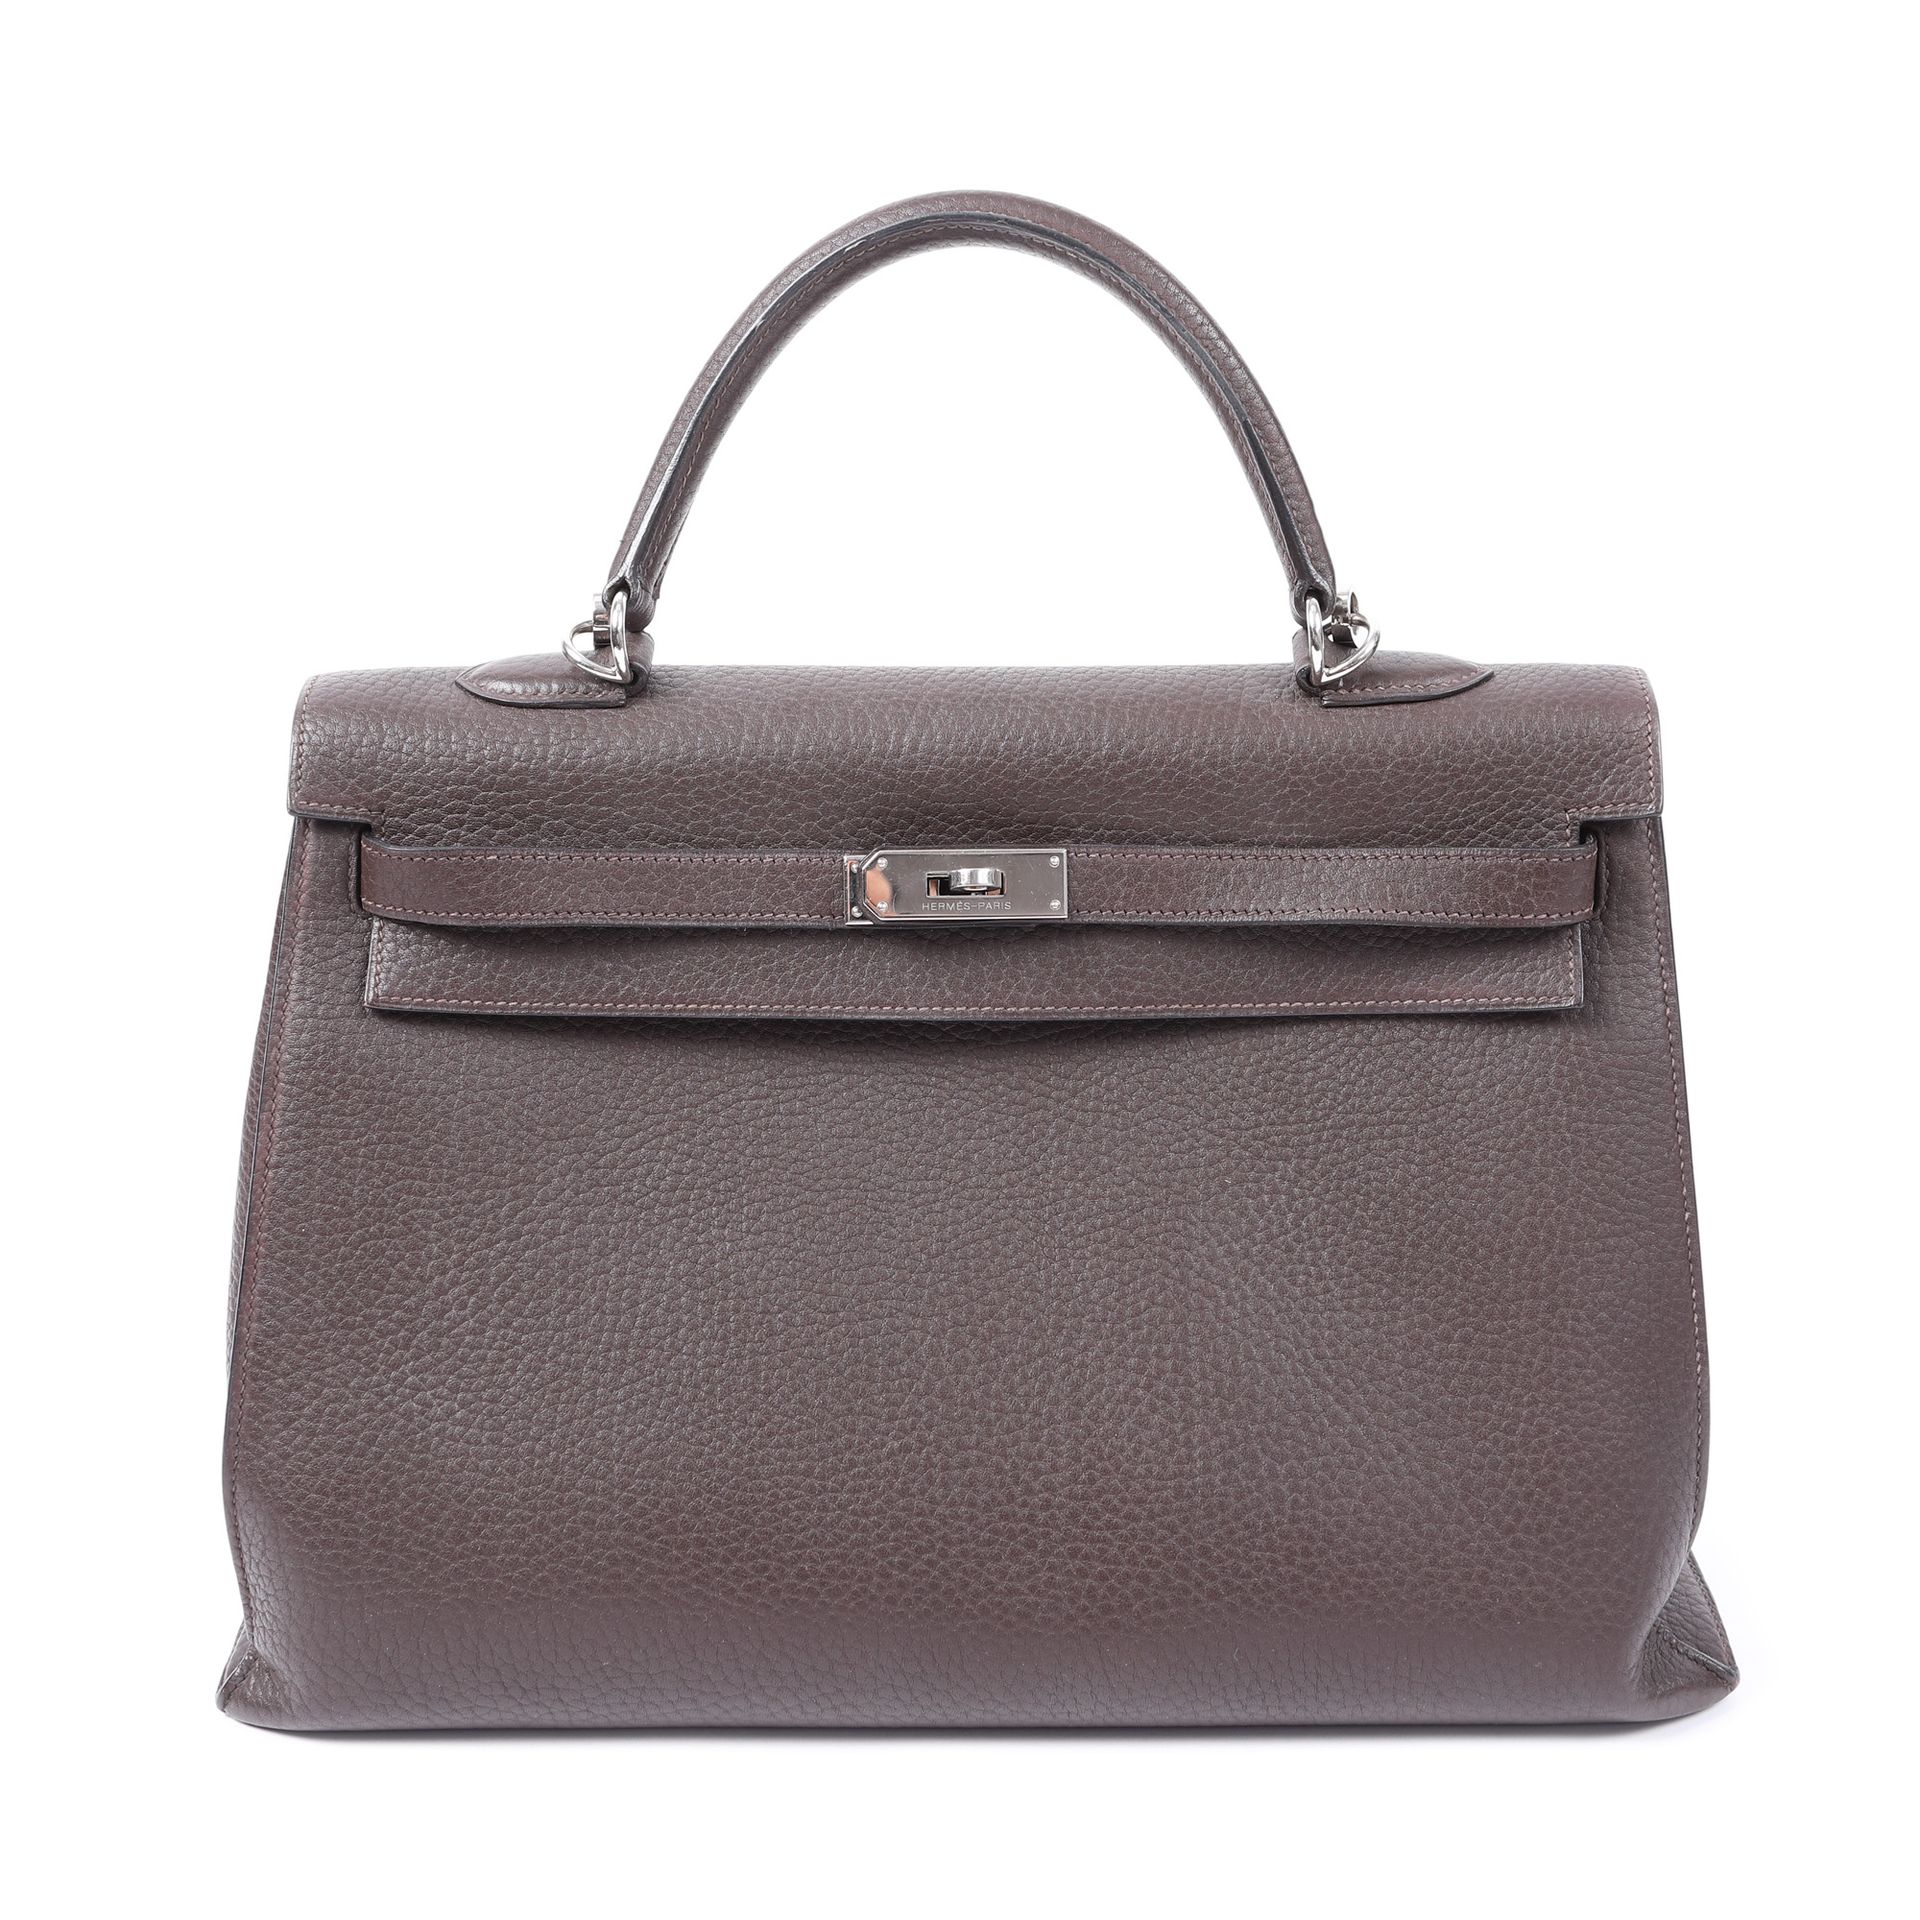 Hermes Kelly 35 bag, Togo leather, Chocolate Brown colour Pelle di Togo; palladi&hellip;